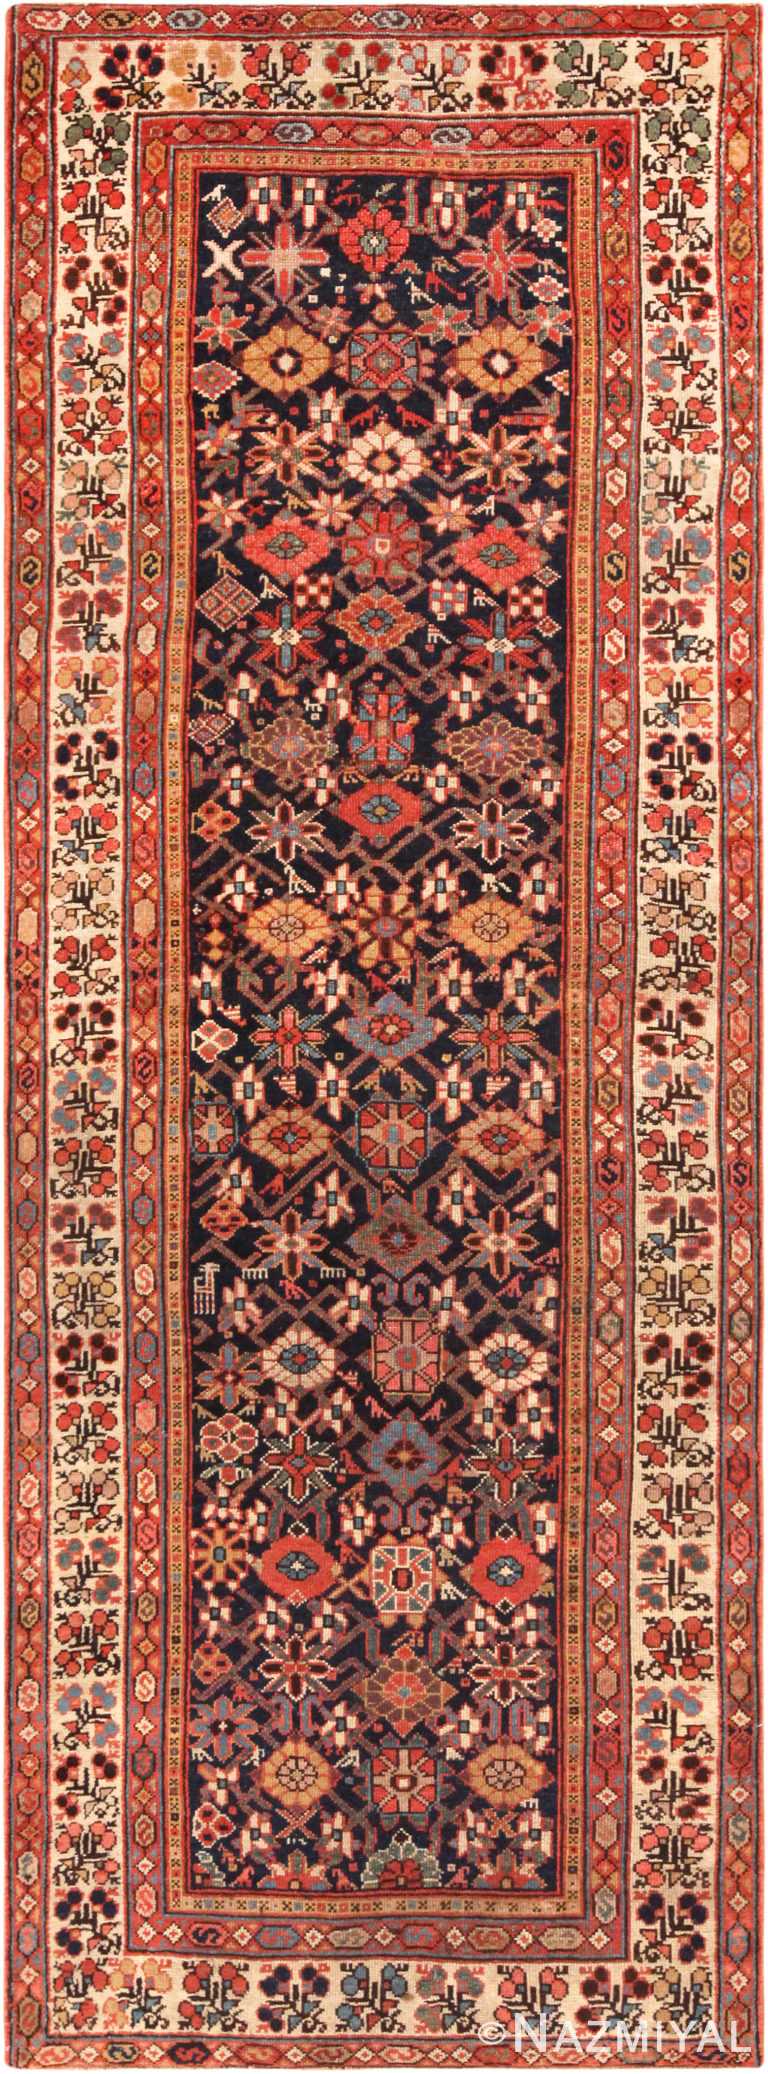 Antique North West Persian Runner Rug 72189 by Nazmiyal Antique Rugs